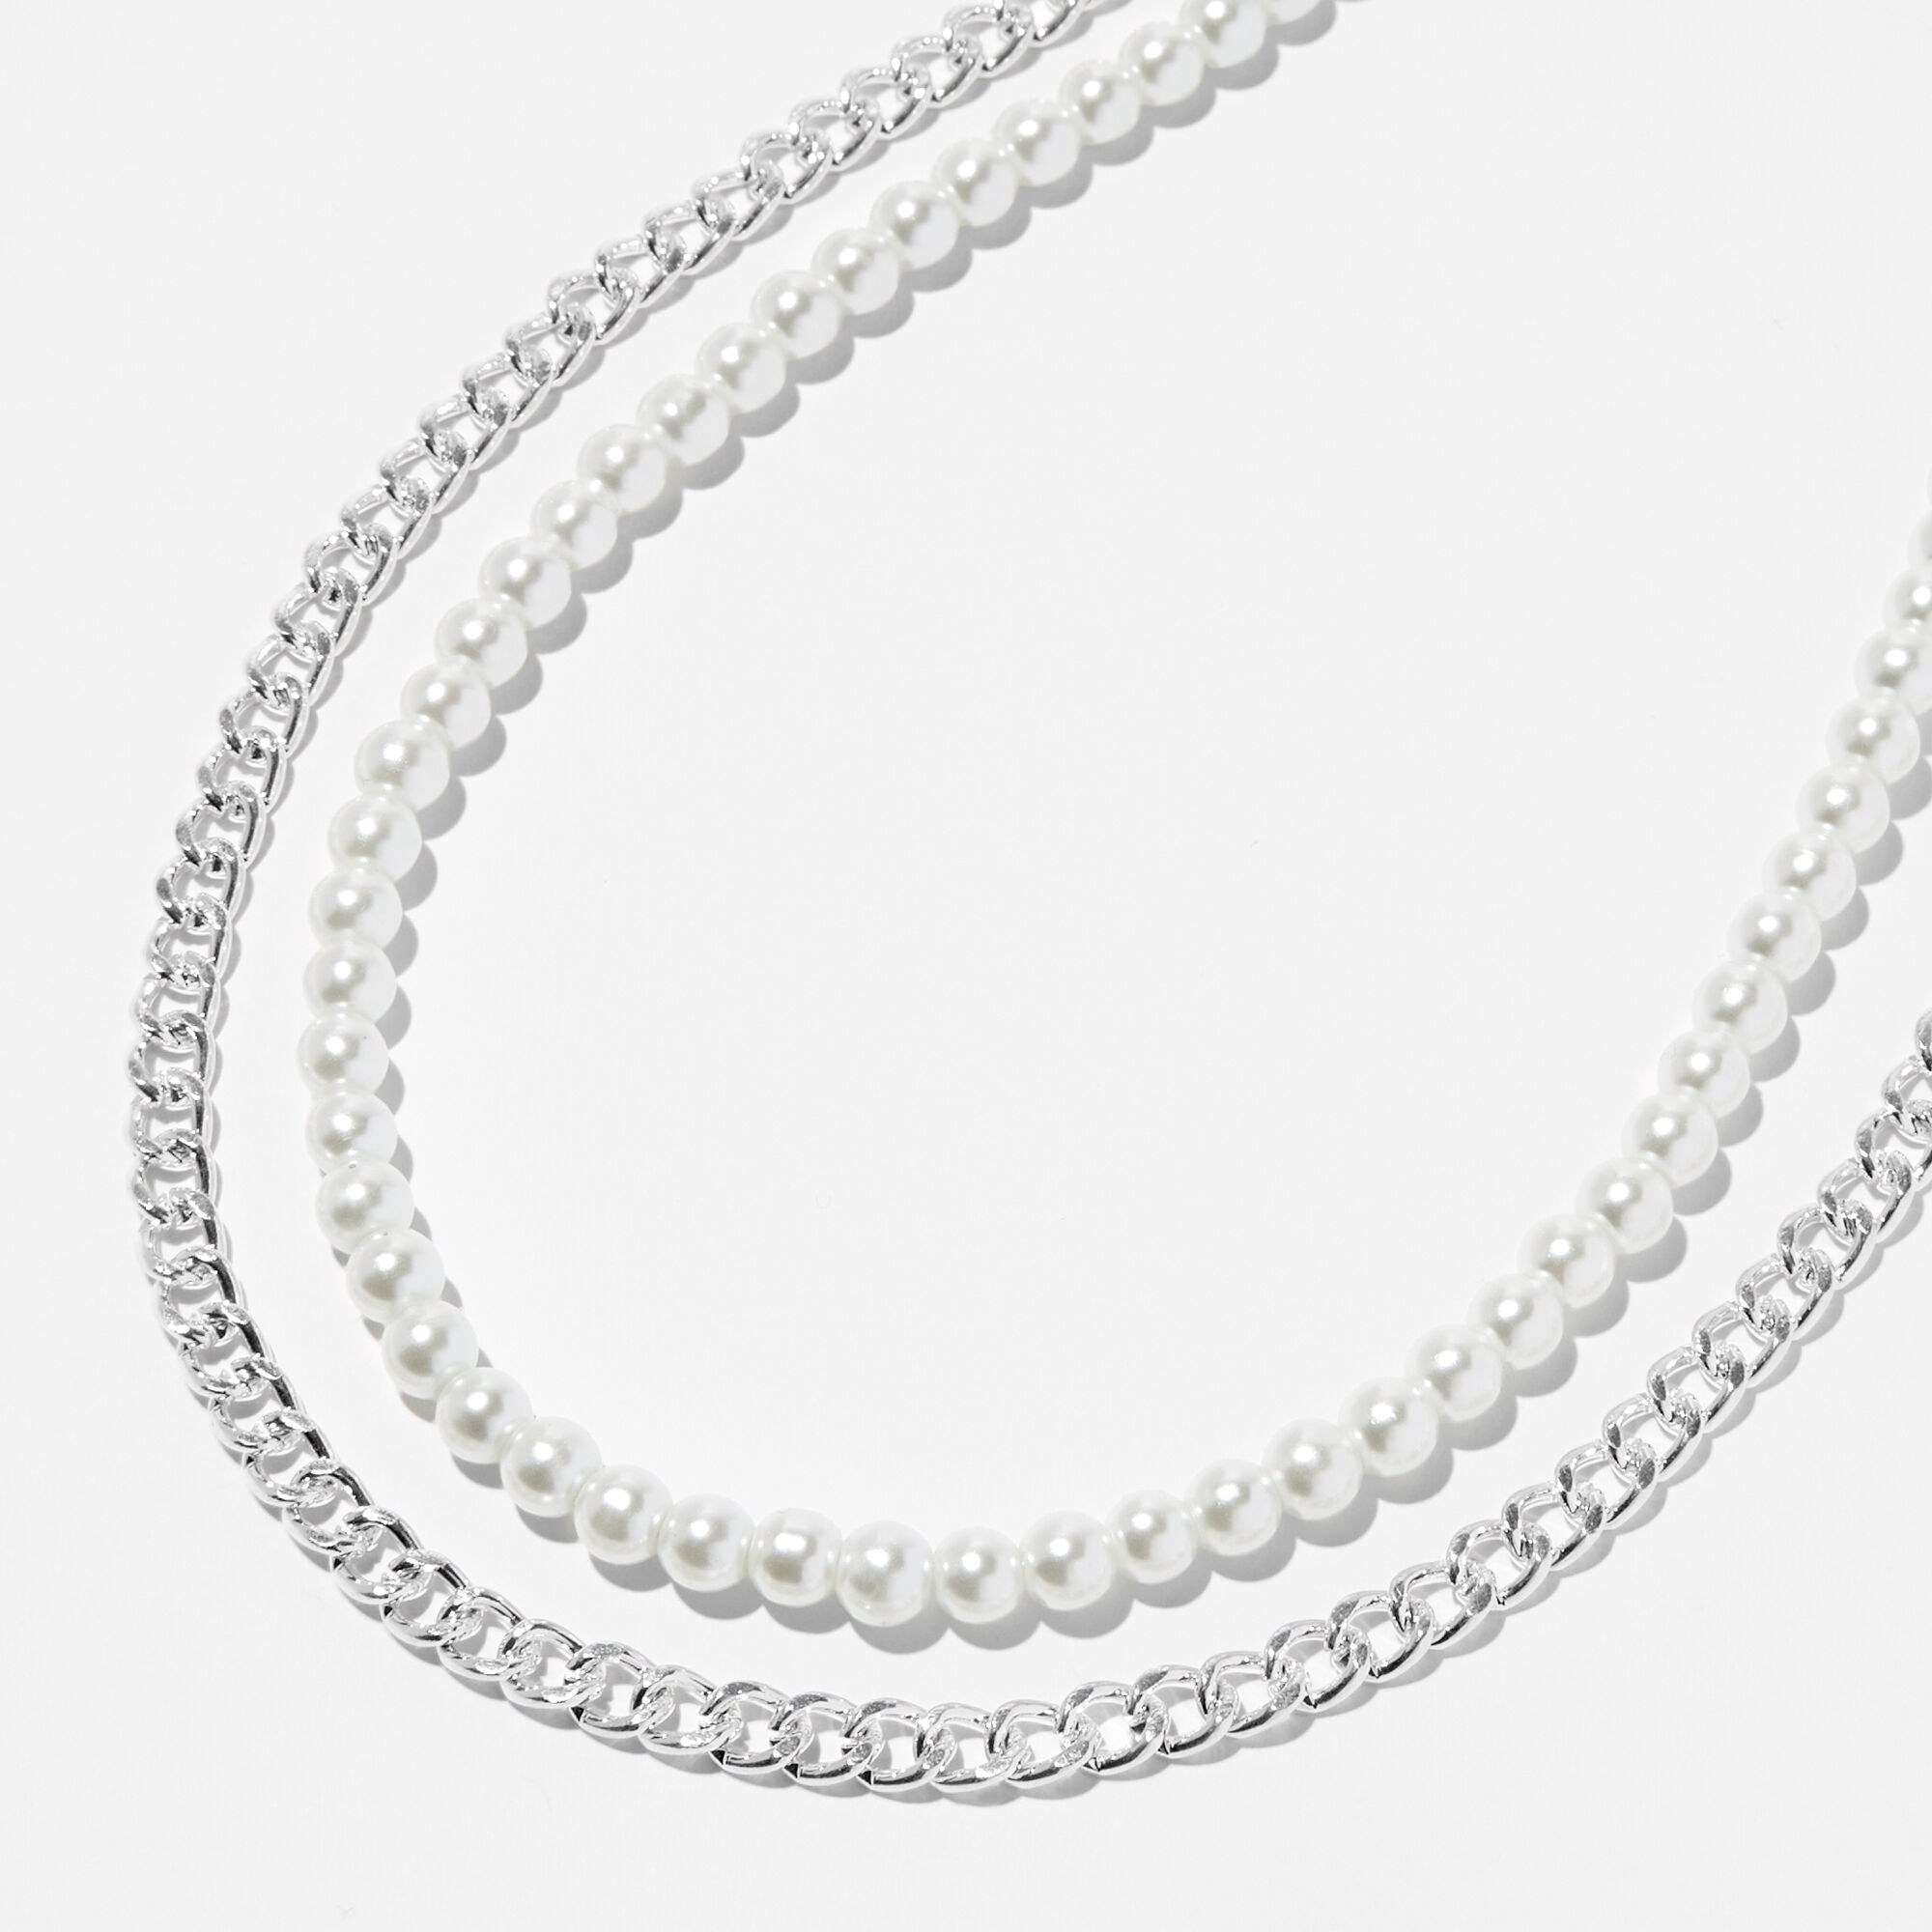 Cream Multistrand Pearl Necklace - HMJServices